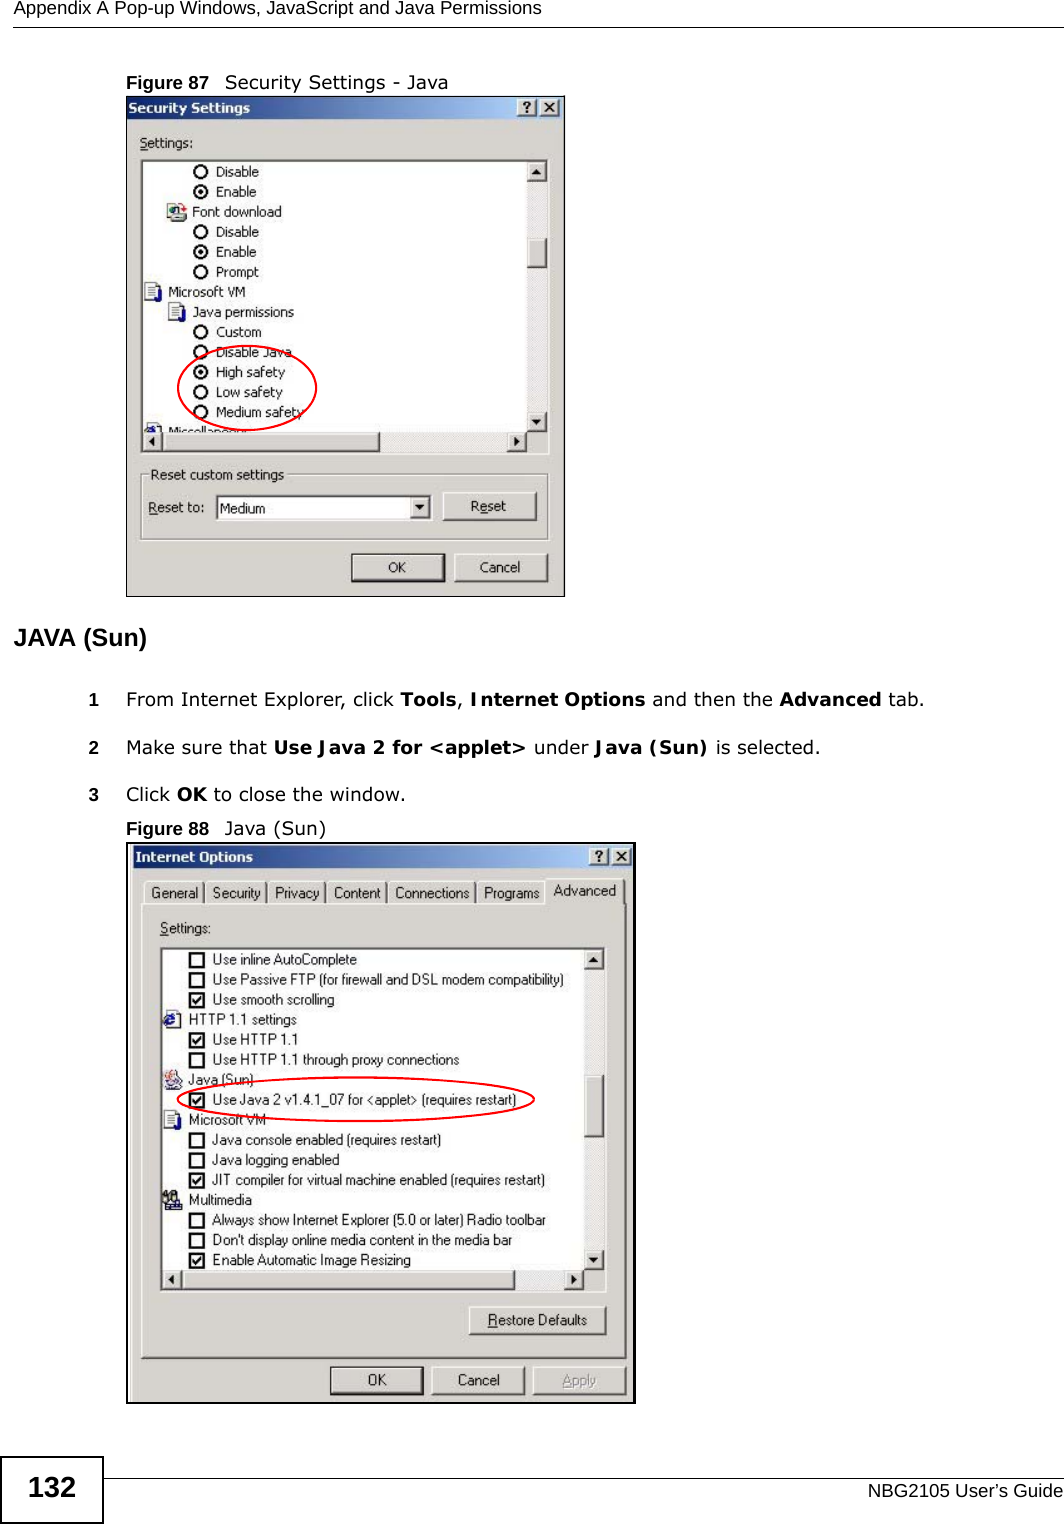 Appendix A Pop-up Windows, JavaScript and Java PermissionsNBG2105 User’s Guide132Figure 87   Security Settings - Java JAVA (Sun)1From Internet Explorer, click Tools, Internet Options and then the Advanced tab. 2Make sure that Use Java 2 for &lt;applet&gt; under Java (Sun) is selected.3Click OK to close the window.Figure 88   Java (Sun)